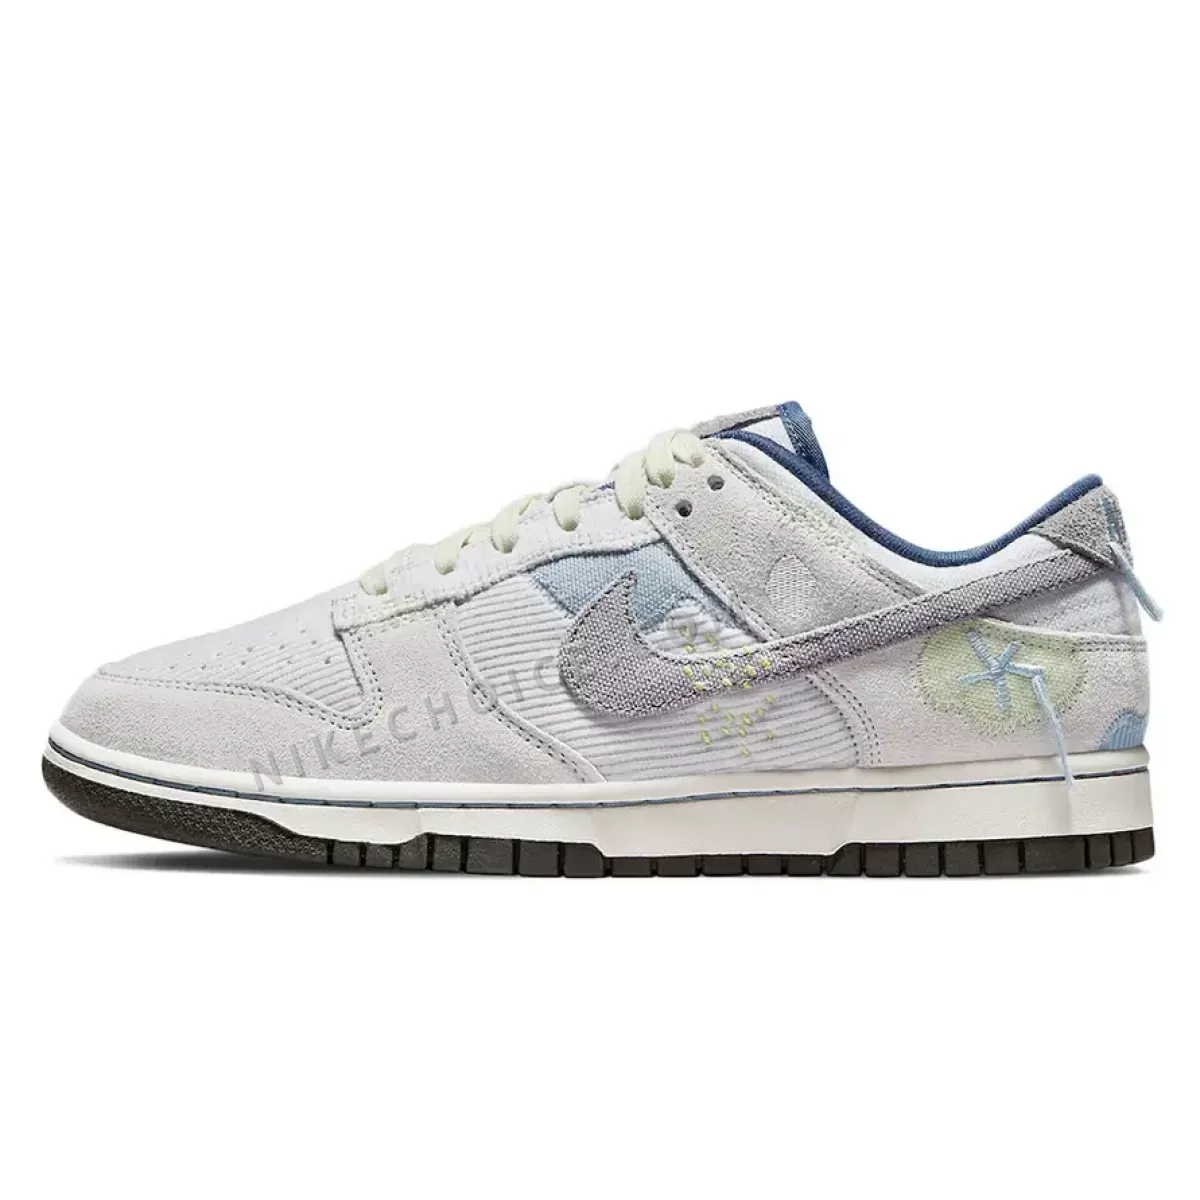 Nike Dunk Low Bright Side Grey DQ5076-001 / on the bright side dunks